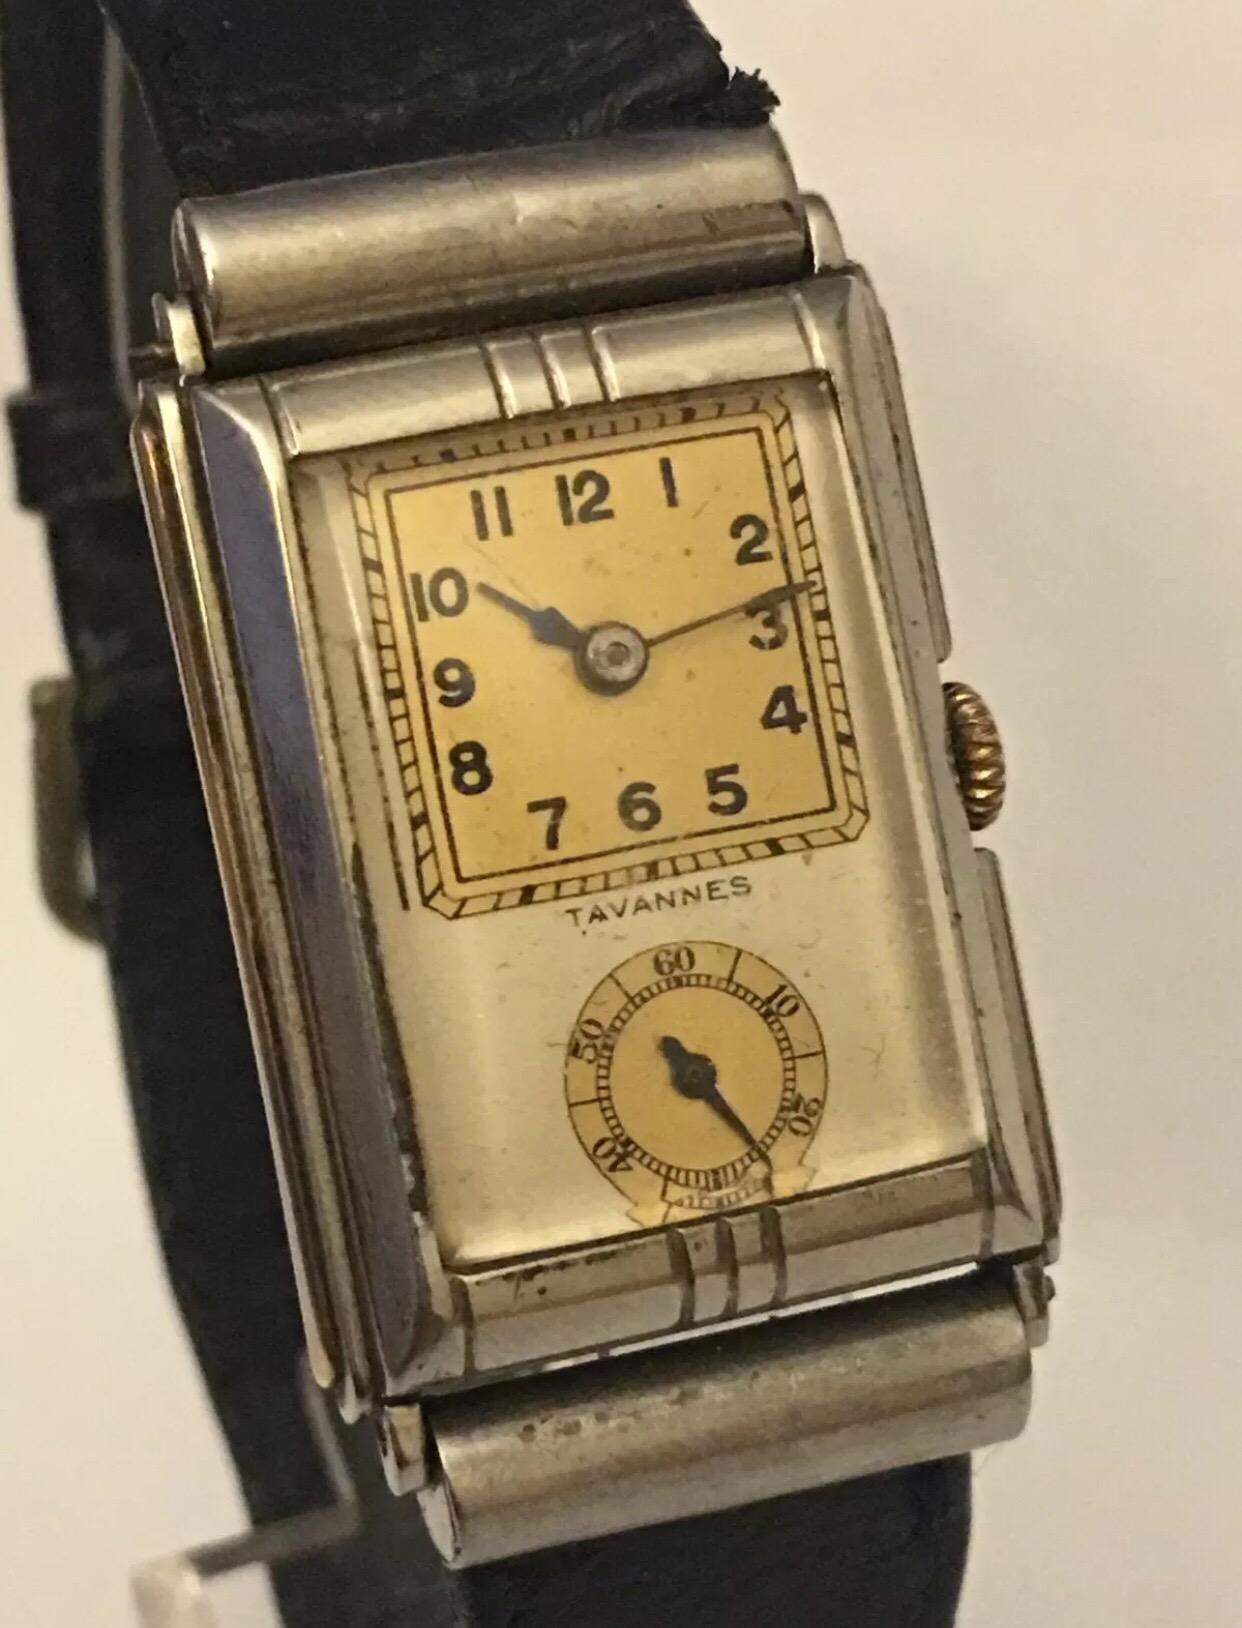 Rare Vintage Hand-winding Tavannes Wristwatch.

This watch is working and ticking well. The strap is worn. The case has some visible tarnished as shown.